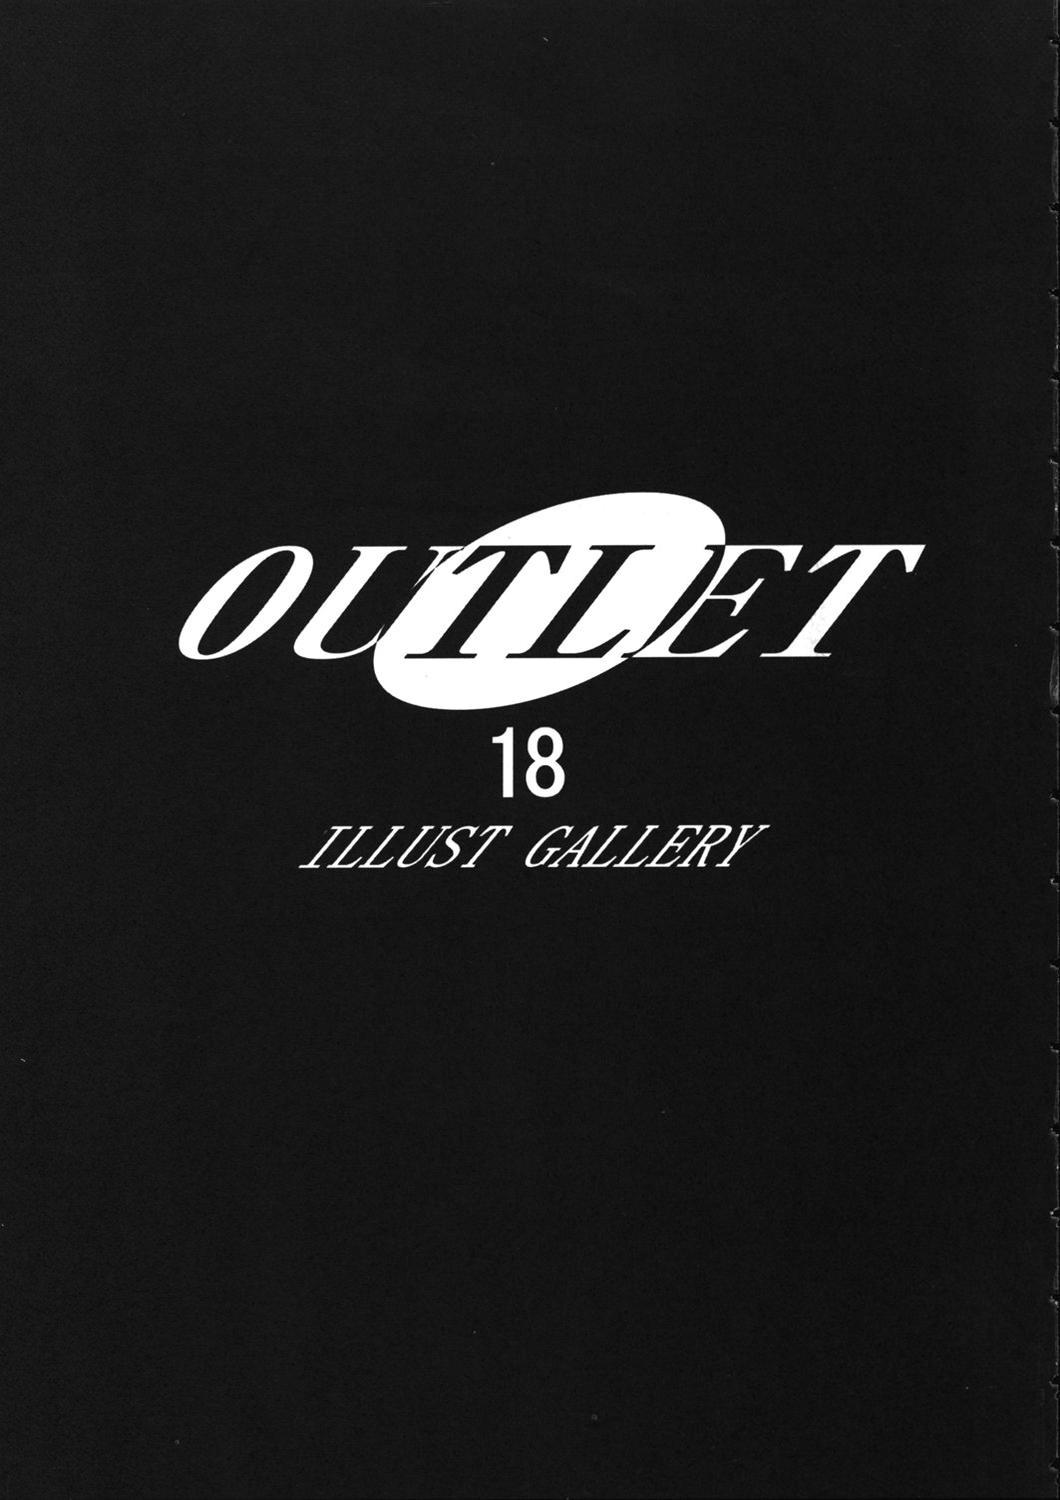 OUTLET 18 33